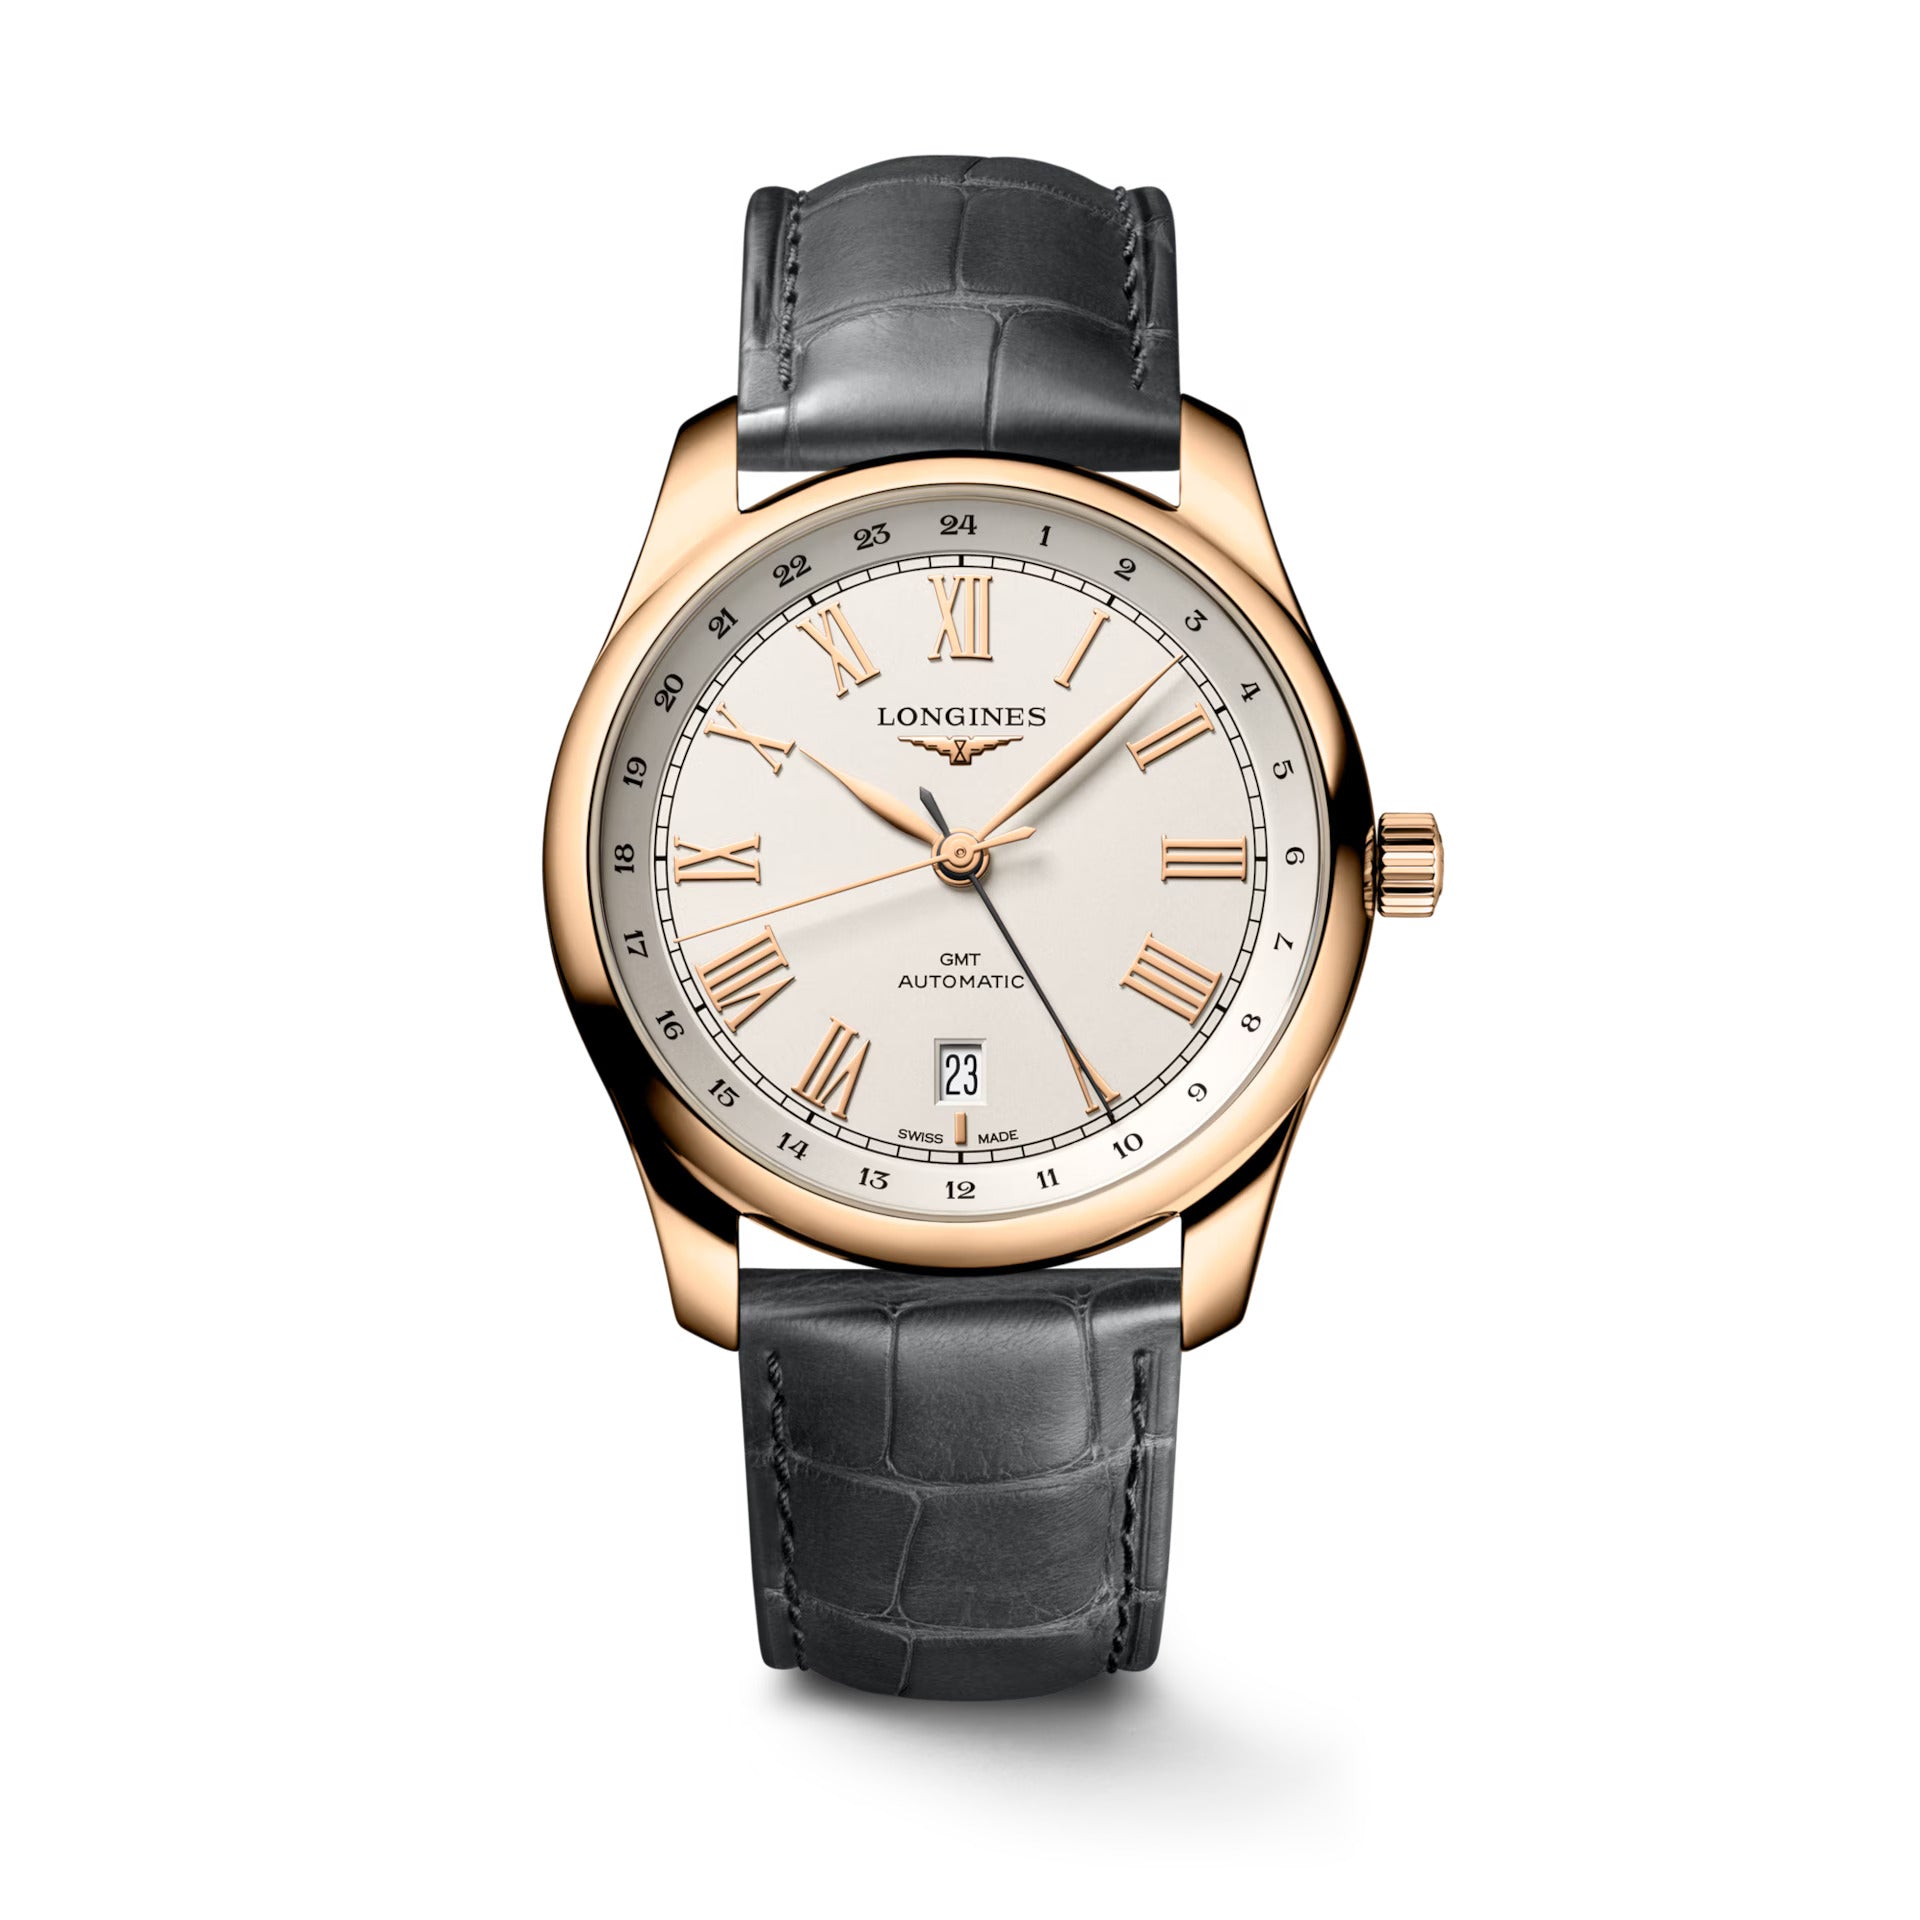 THE LONGINES MASTER COLLECTION GMT "LIMITED TO 500 PIECES"